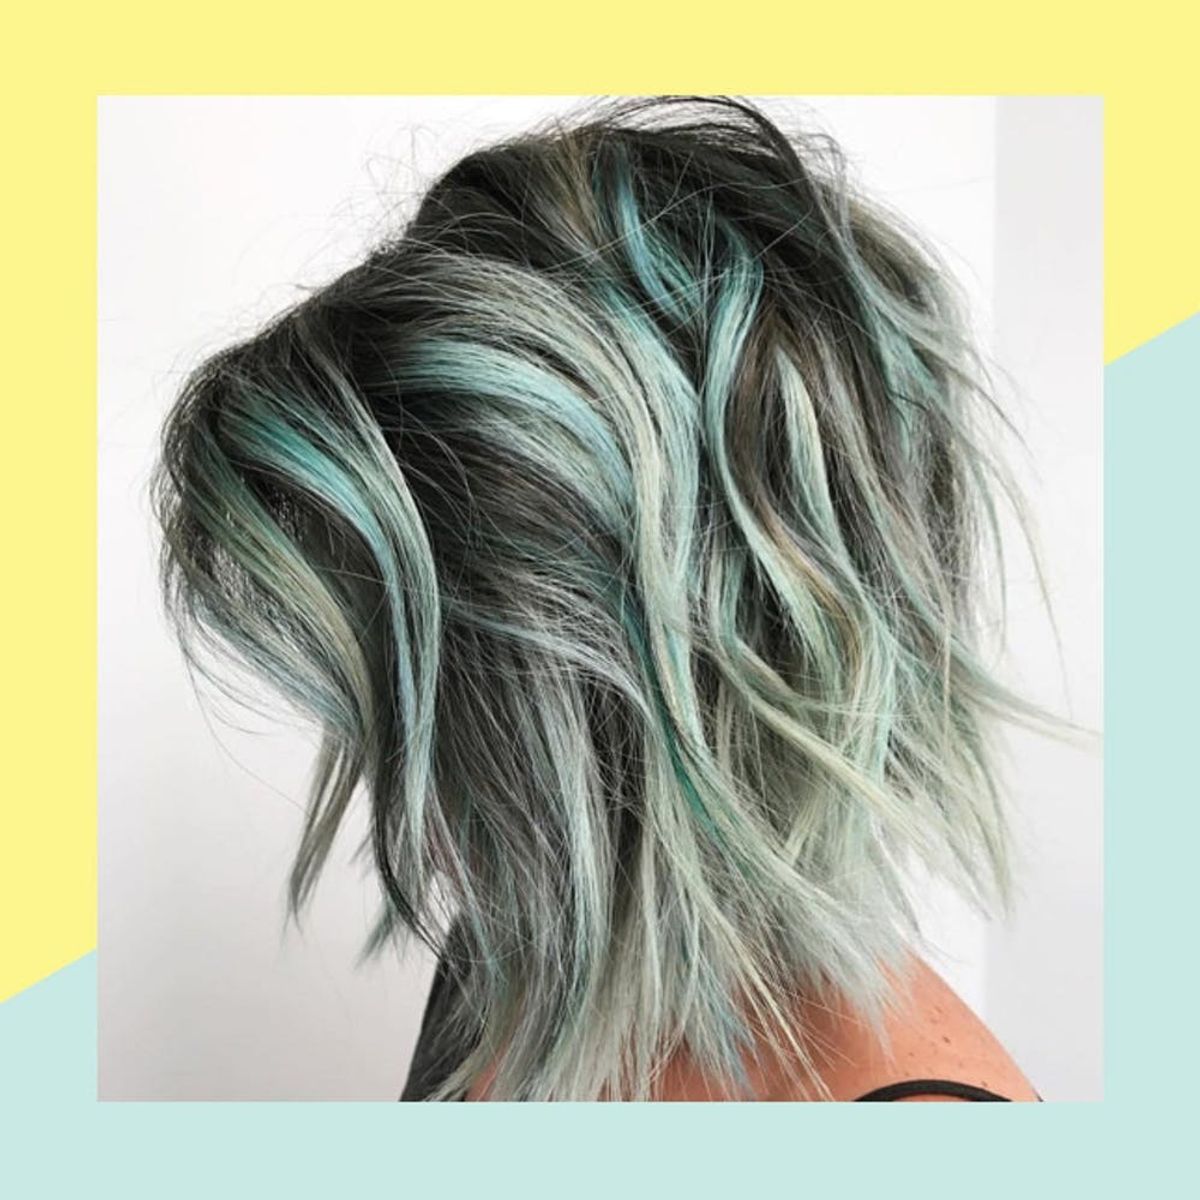 25 Hair Color Ideas to Try in 2017